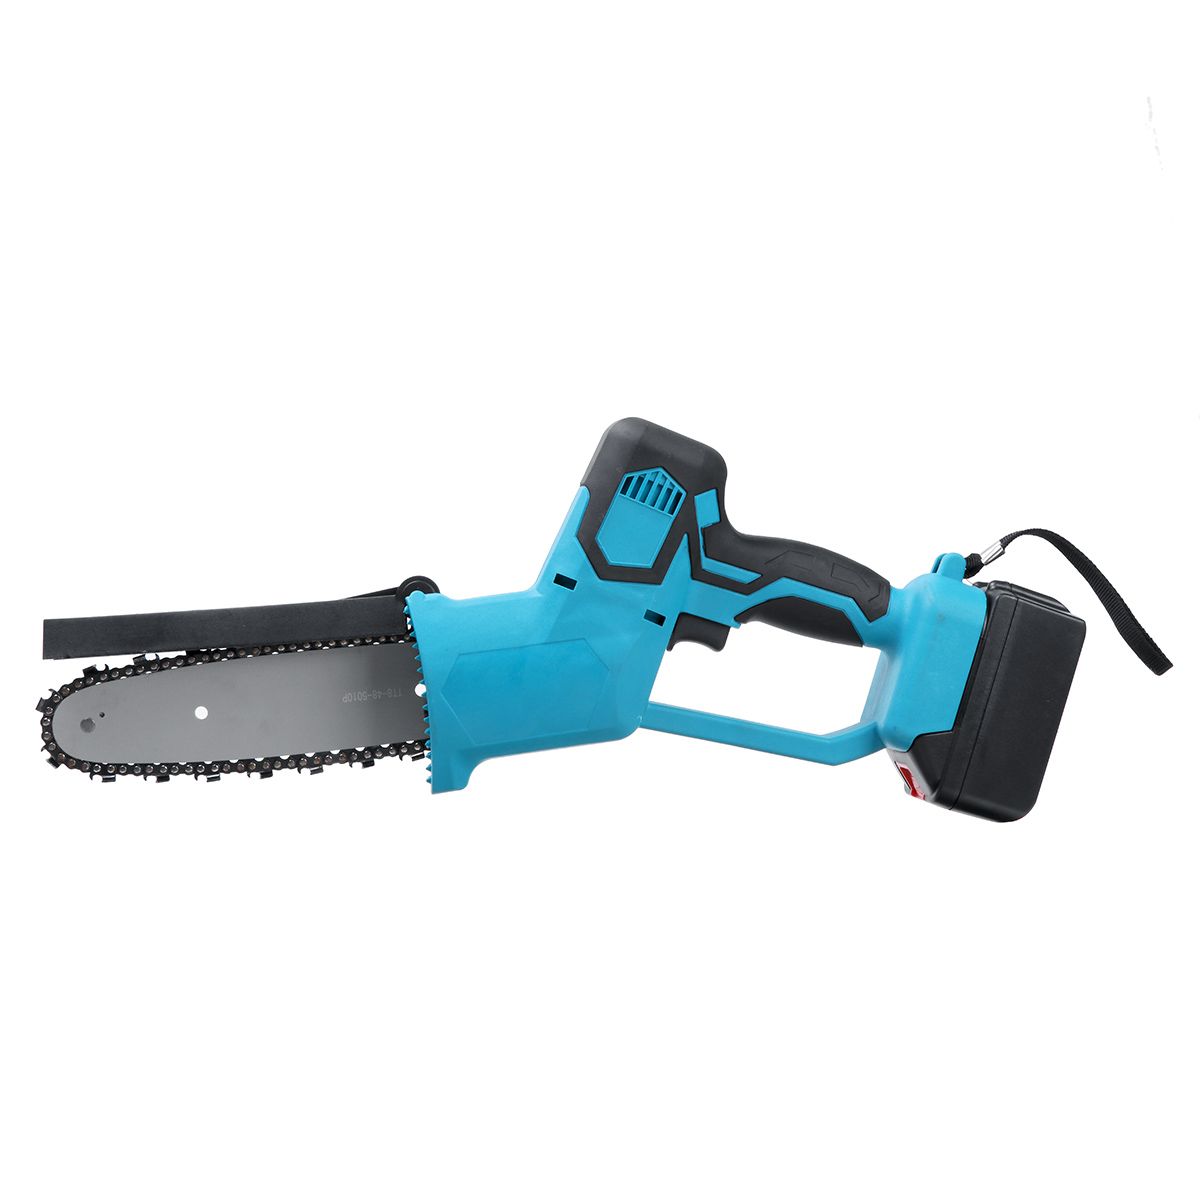 1080W-8-Inch-Electric-Cordless-Chainsaw-Chain-Saw-Handheld-Garden-Wood-Cutting-Tool-with-Battery-1764803